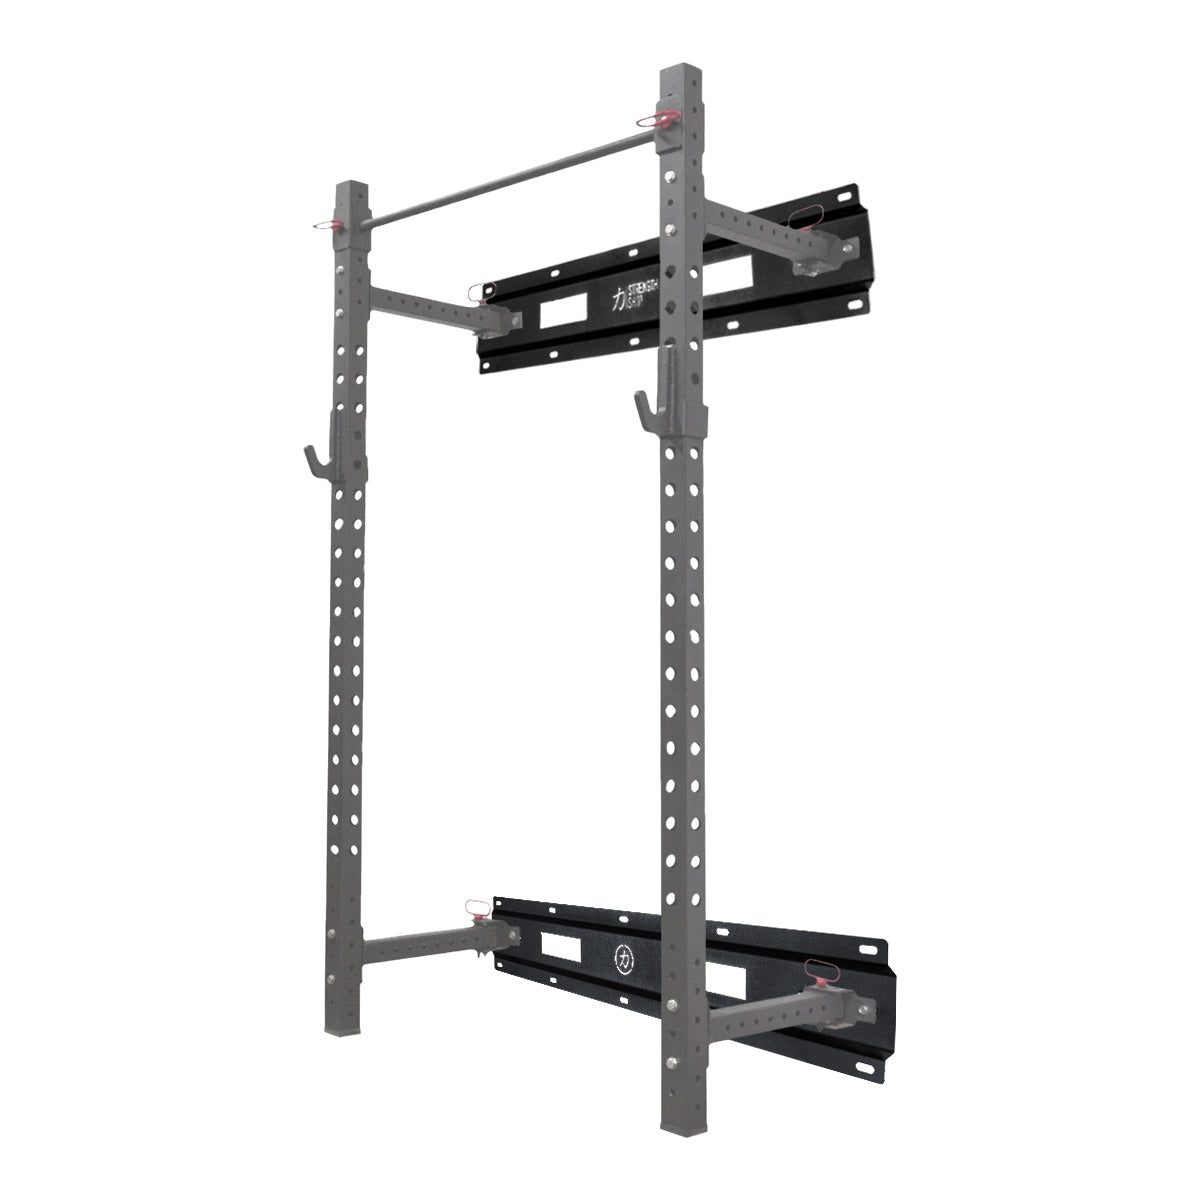 Stringer for Wall Mounted Racks – One Pair - Strength Shop